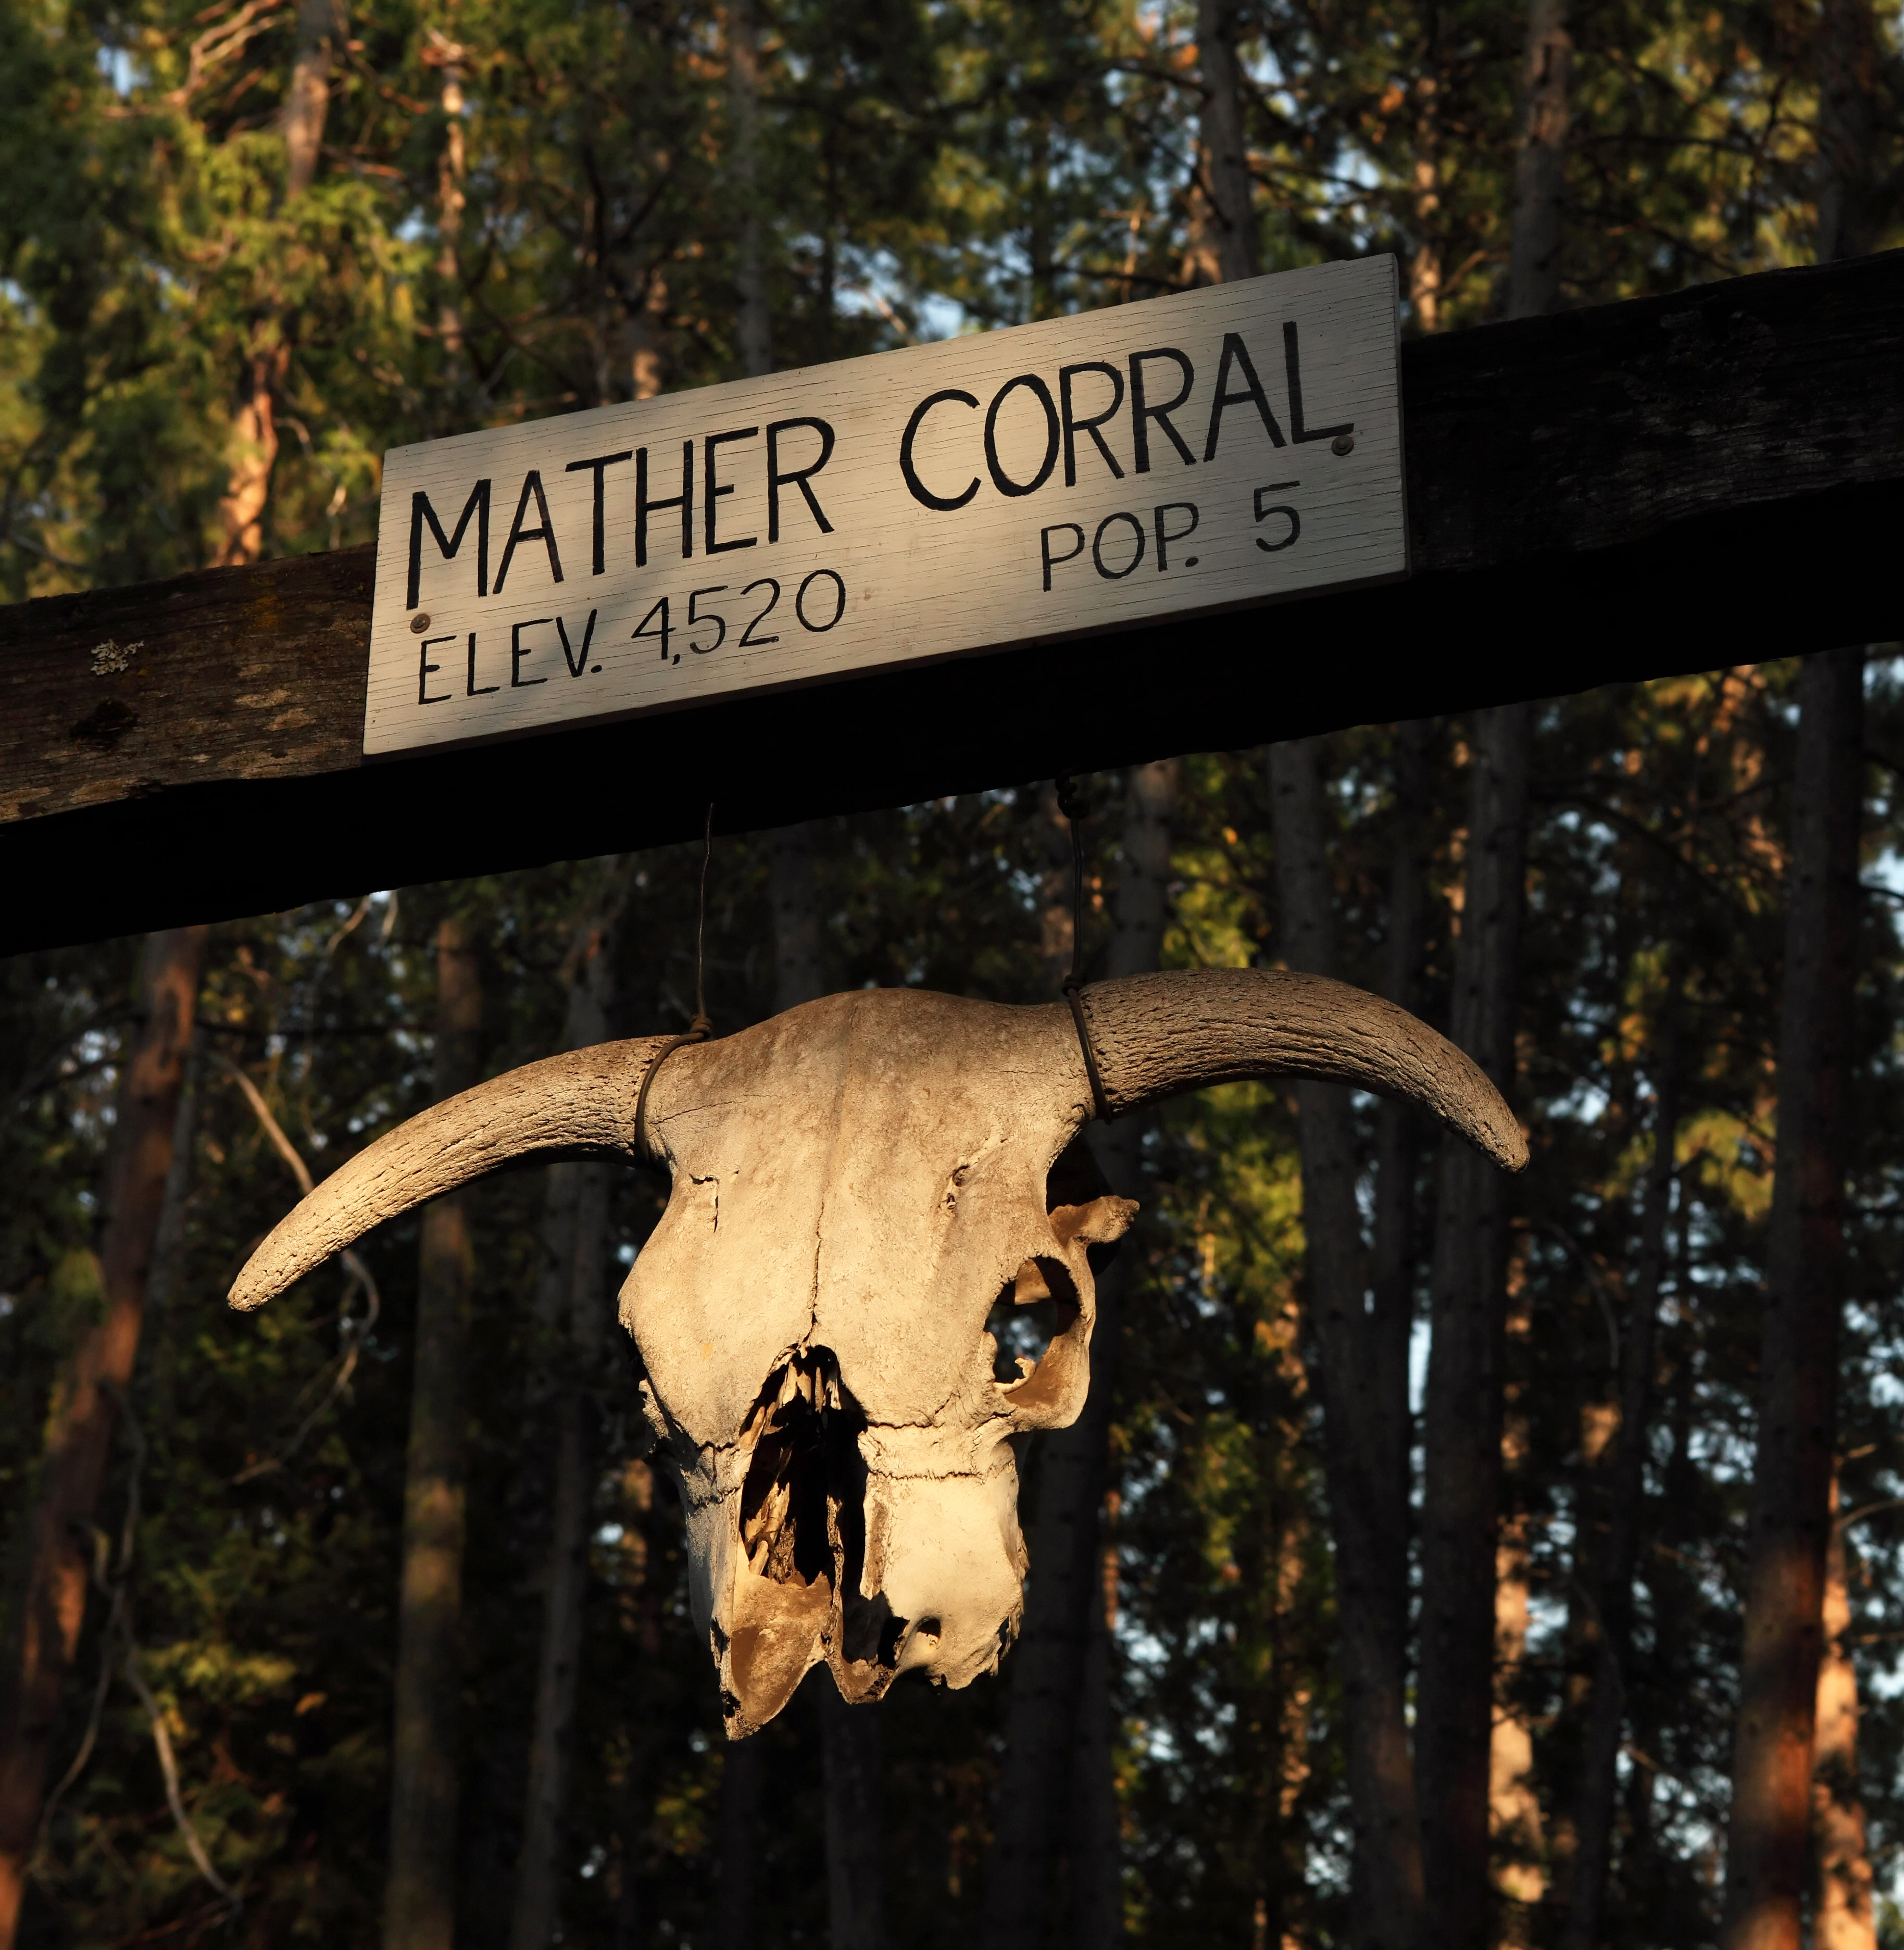 A weathered bull skull hangs below a wooden sign reading &quot;Mather Corral, Elev. 4520, Pop. 5&quot; surrounded by pine trees in warm sunlight.